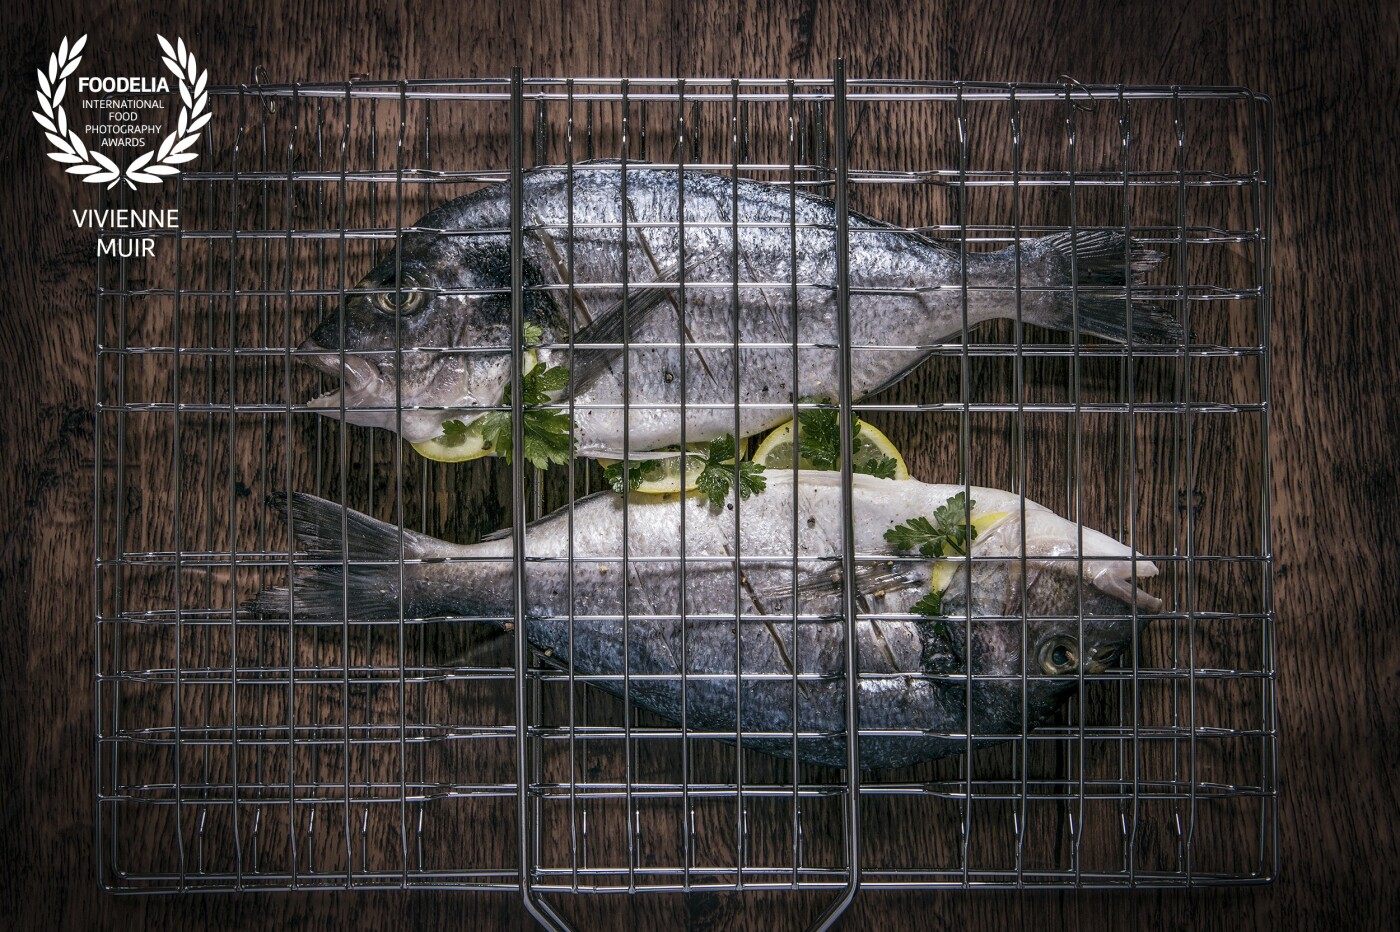 This is part of my "MEAT WITHOUT FEET" collection which was used for my College Graded Unit, and consisted of all kinds of different fish and seafood. This one being Sea Bream.